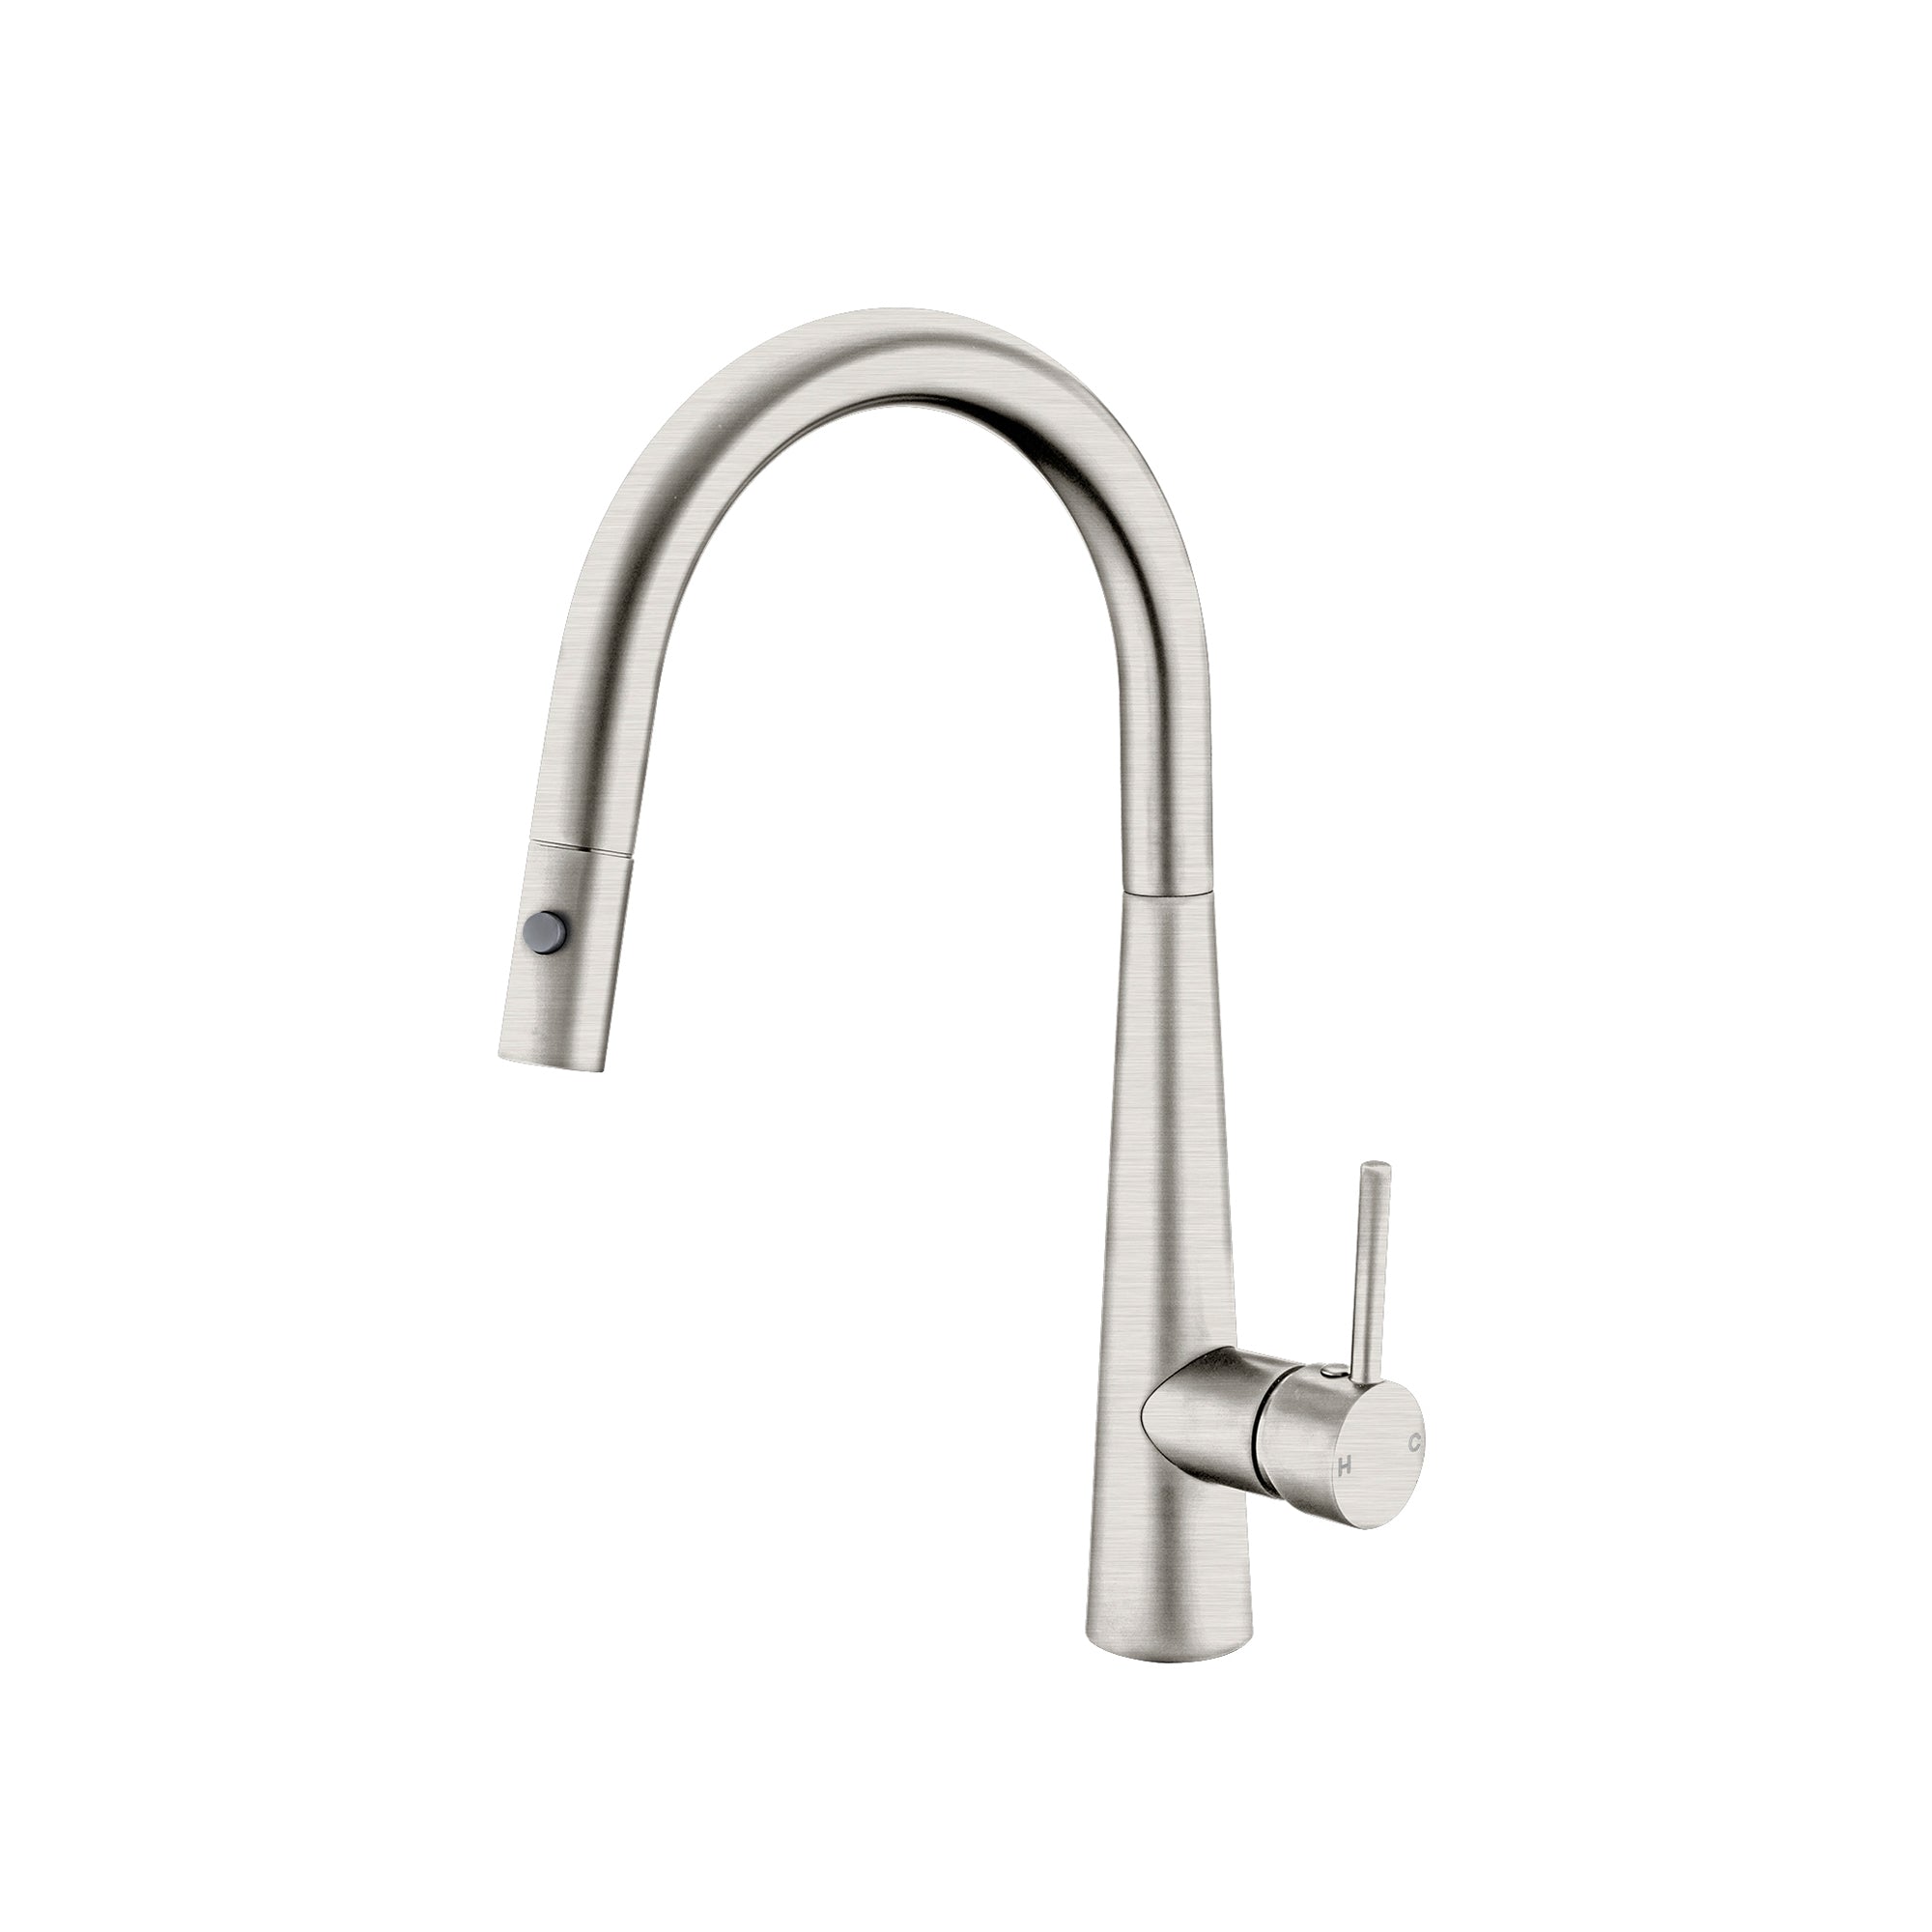 Dolce Pull Out Sink Mixer With Vegie Spray Function Brushed Nickel - NR581009cBN